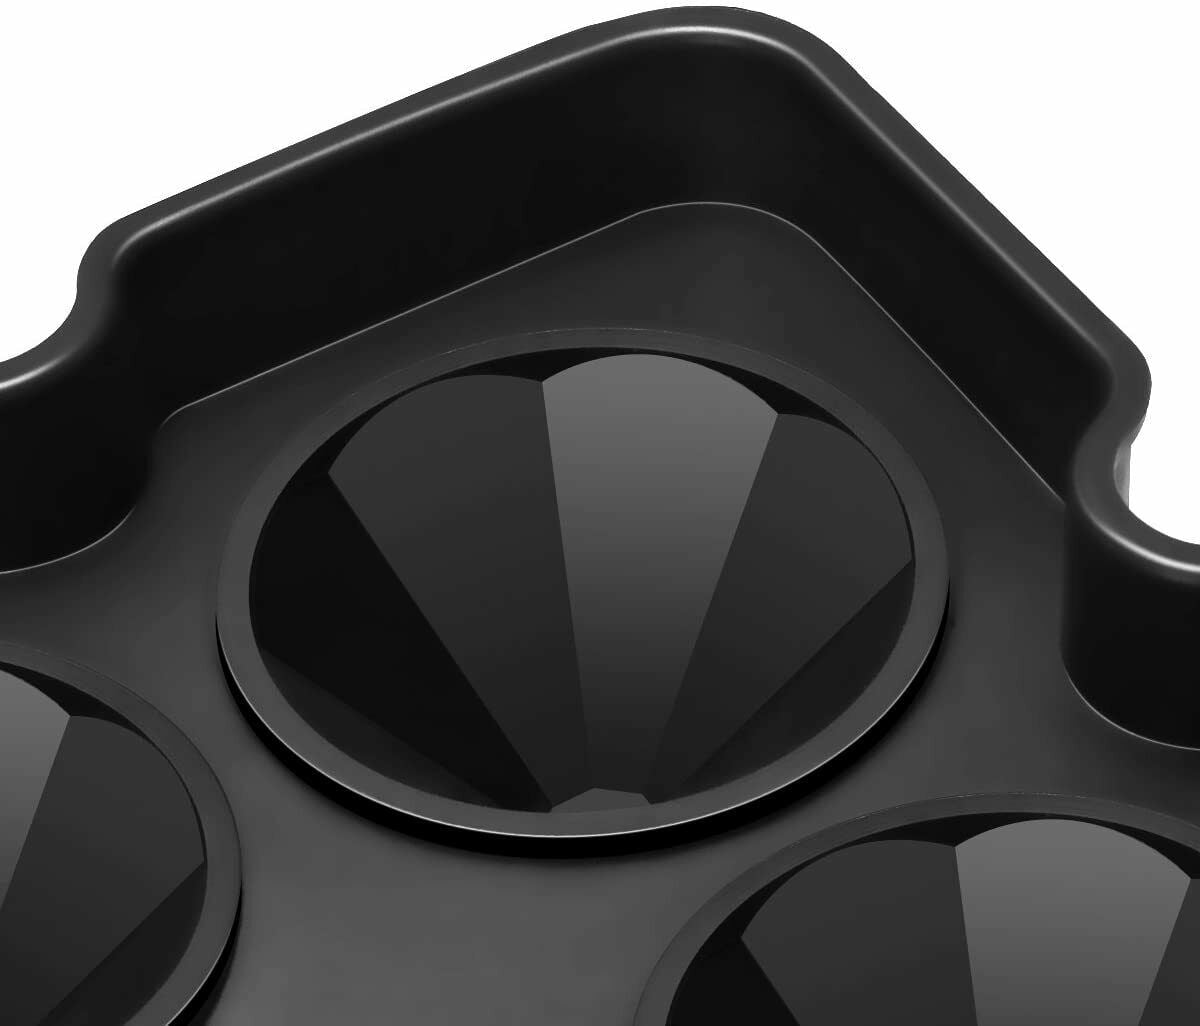 Ice Cube Trays,Ideolco 3D Diamond-Shaped Ice Cube Maker BPA Free Flexible Silicone Ice Tray with Spill-Resistant Removable Lid and Funnel for Cocktail Whisky Bourbon Pudding 